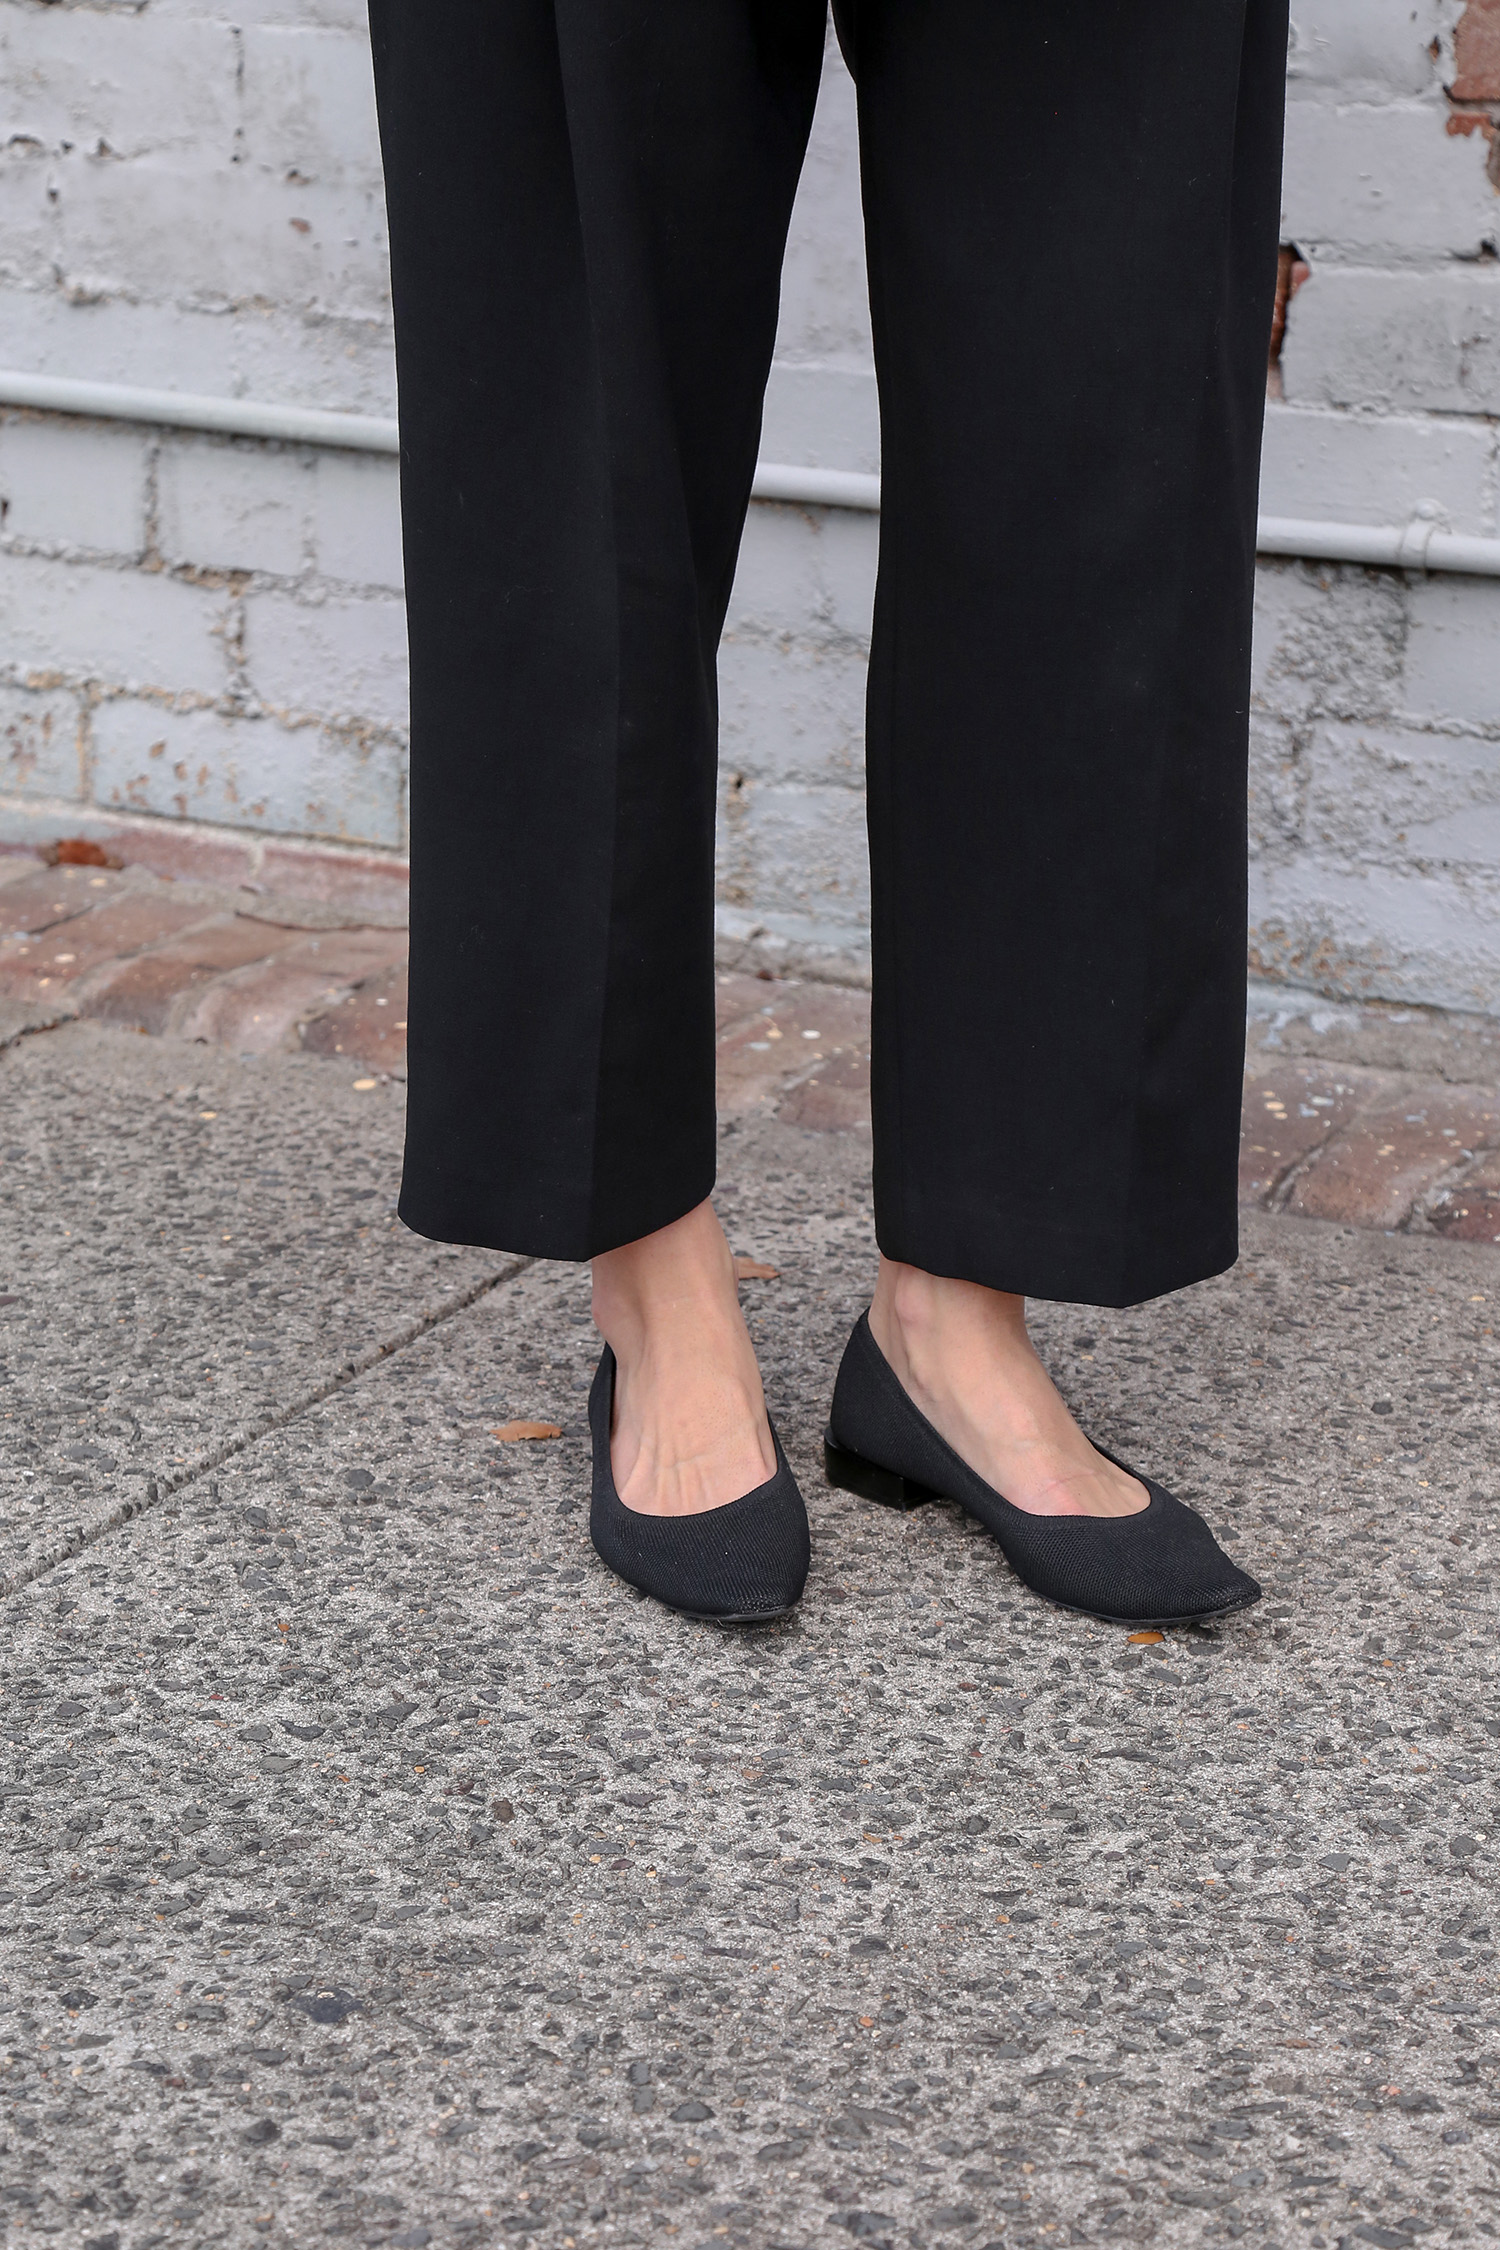 VIVAIA black Minnie flats review wear and tear over time